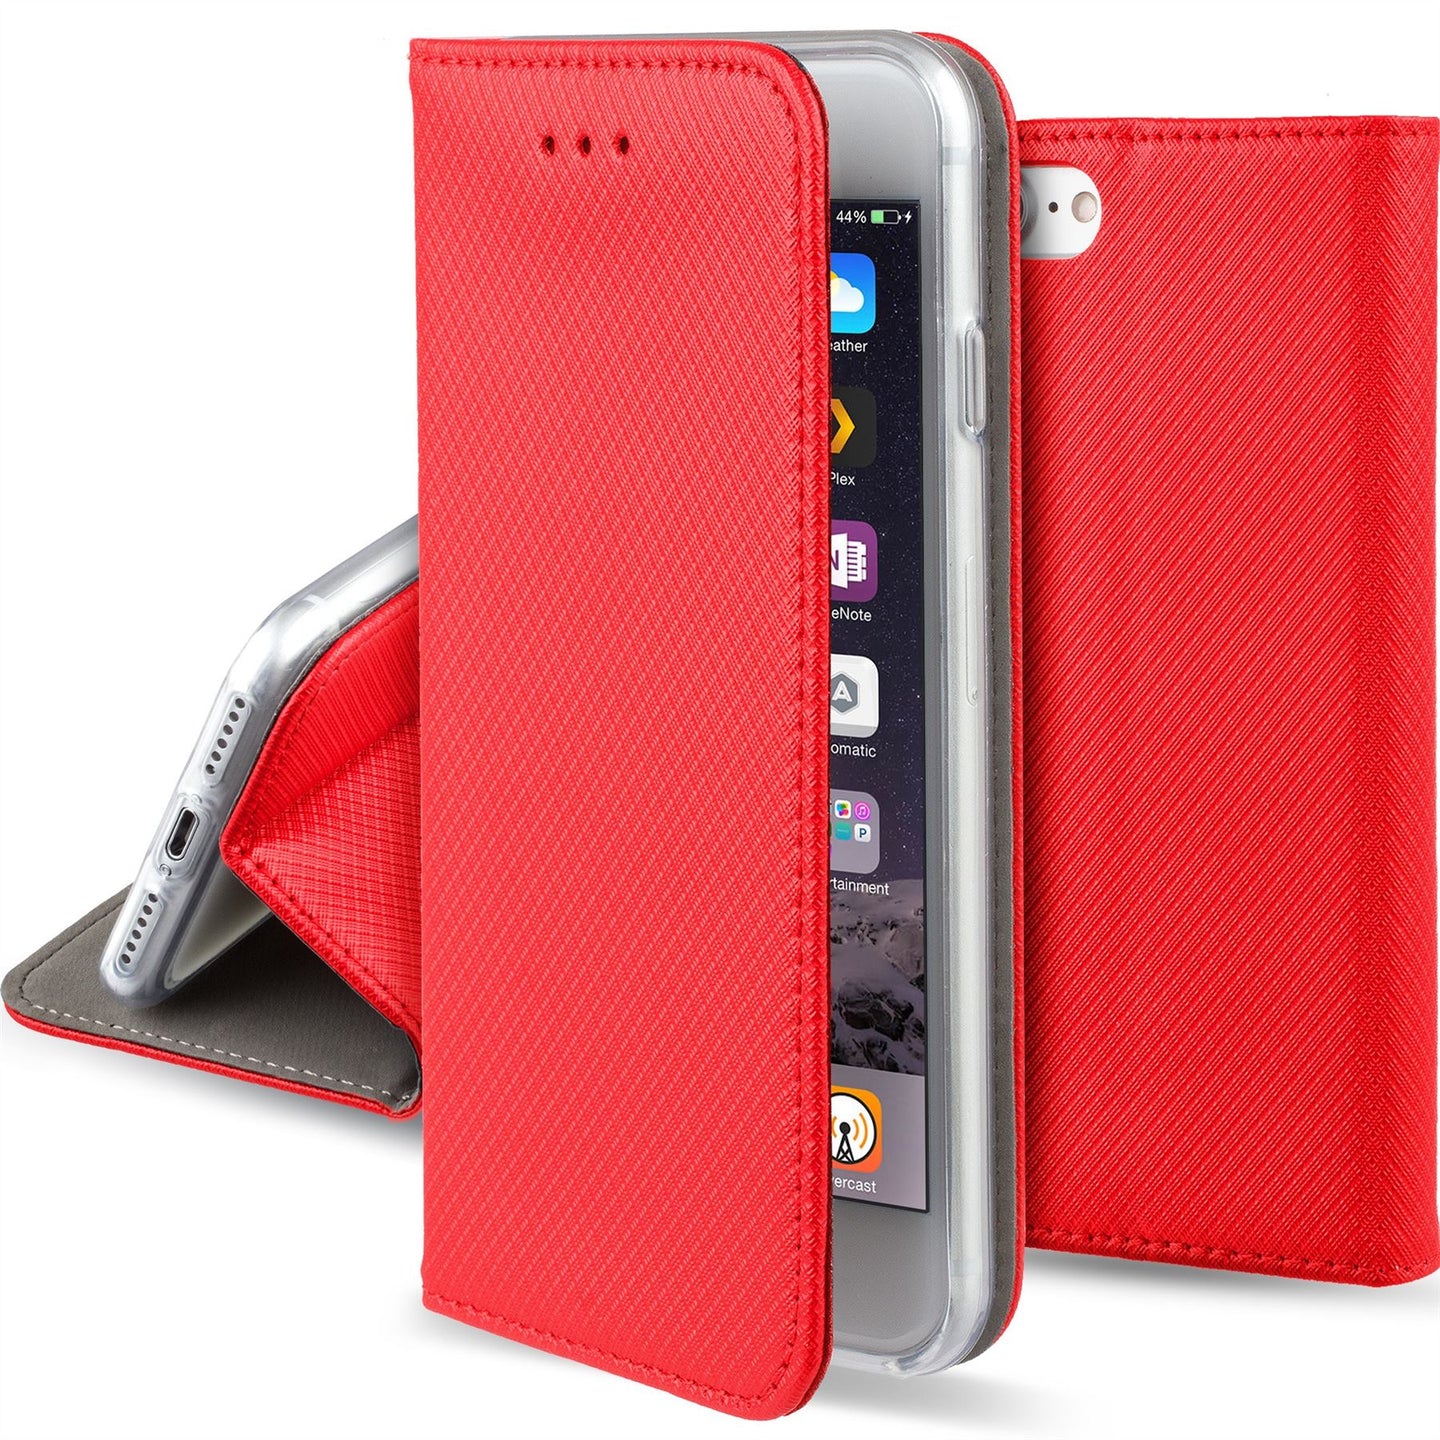 Moozy Case Flip Cover for iPhone 6s, iPhone 6, Red - Smart Magnetic Flip Case with Card Holder and Stand